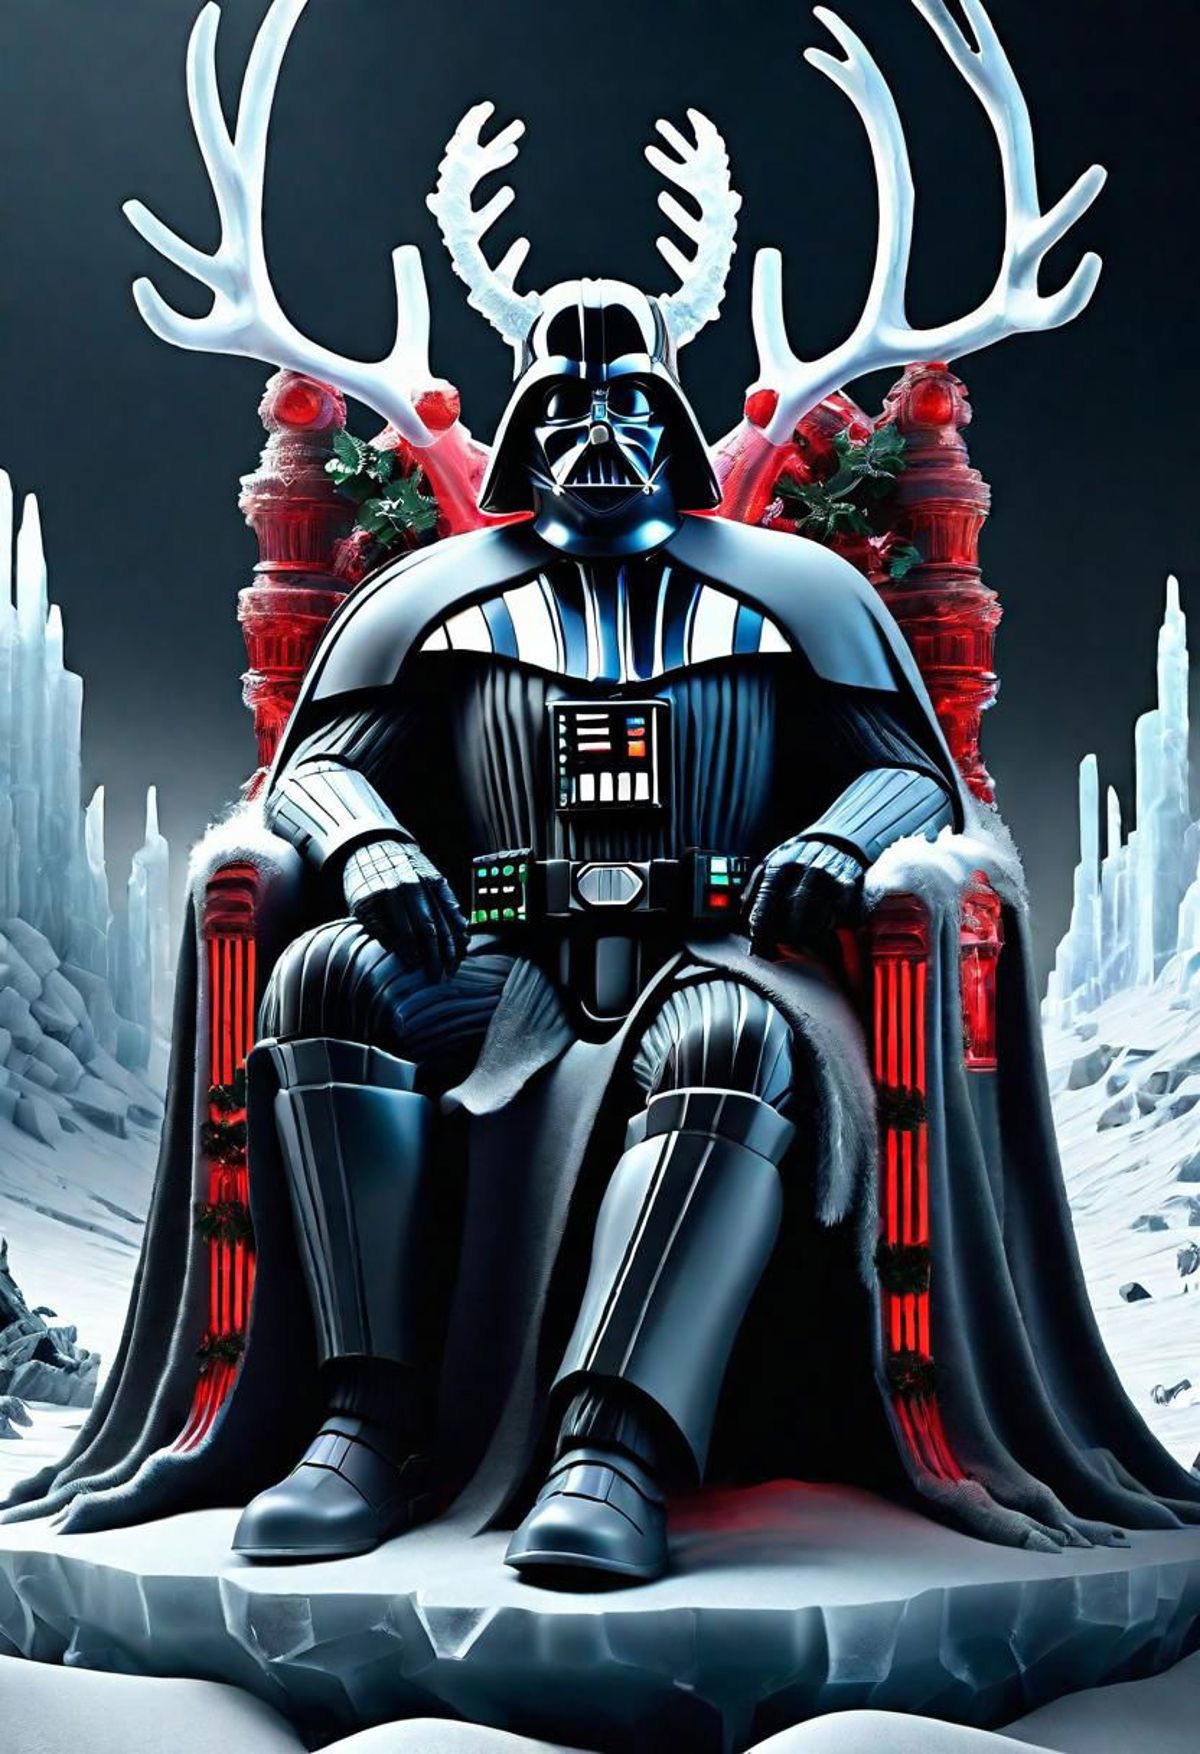 Darth Vader Sitting on a Throne with Christmas Decorations in the Background